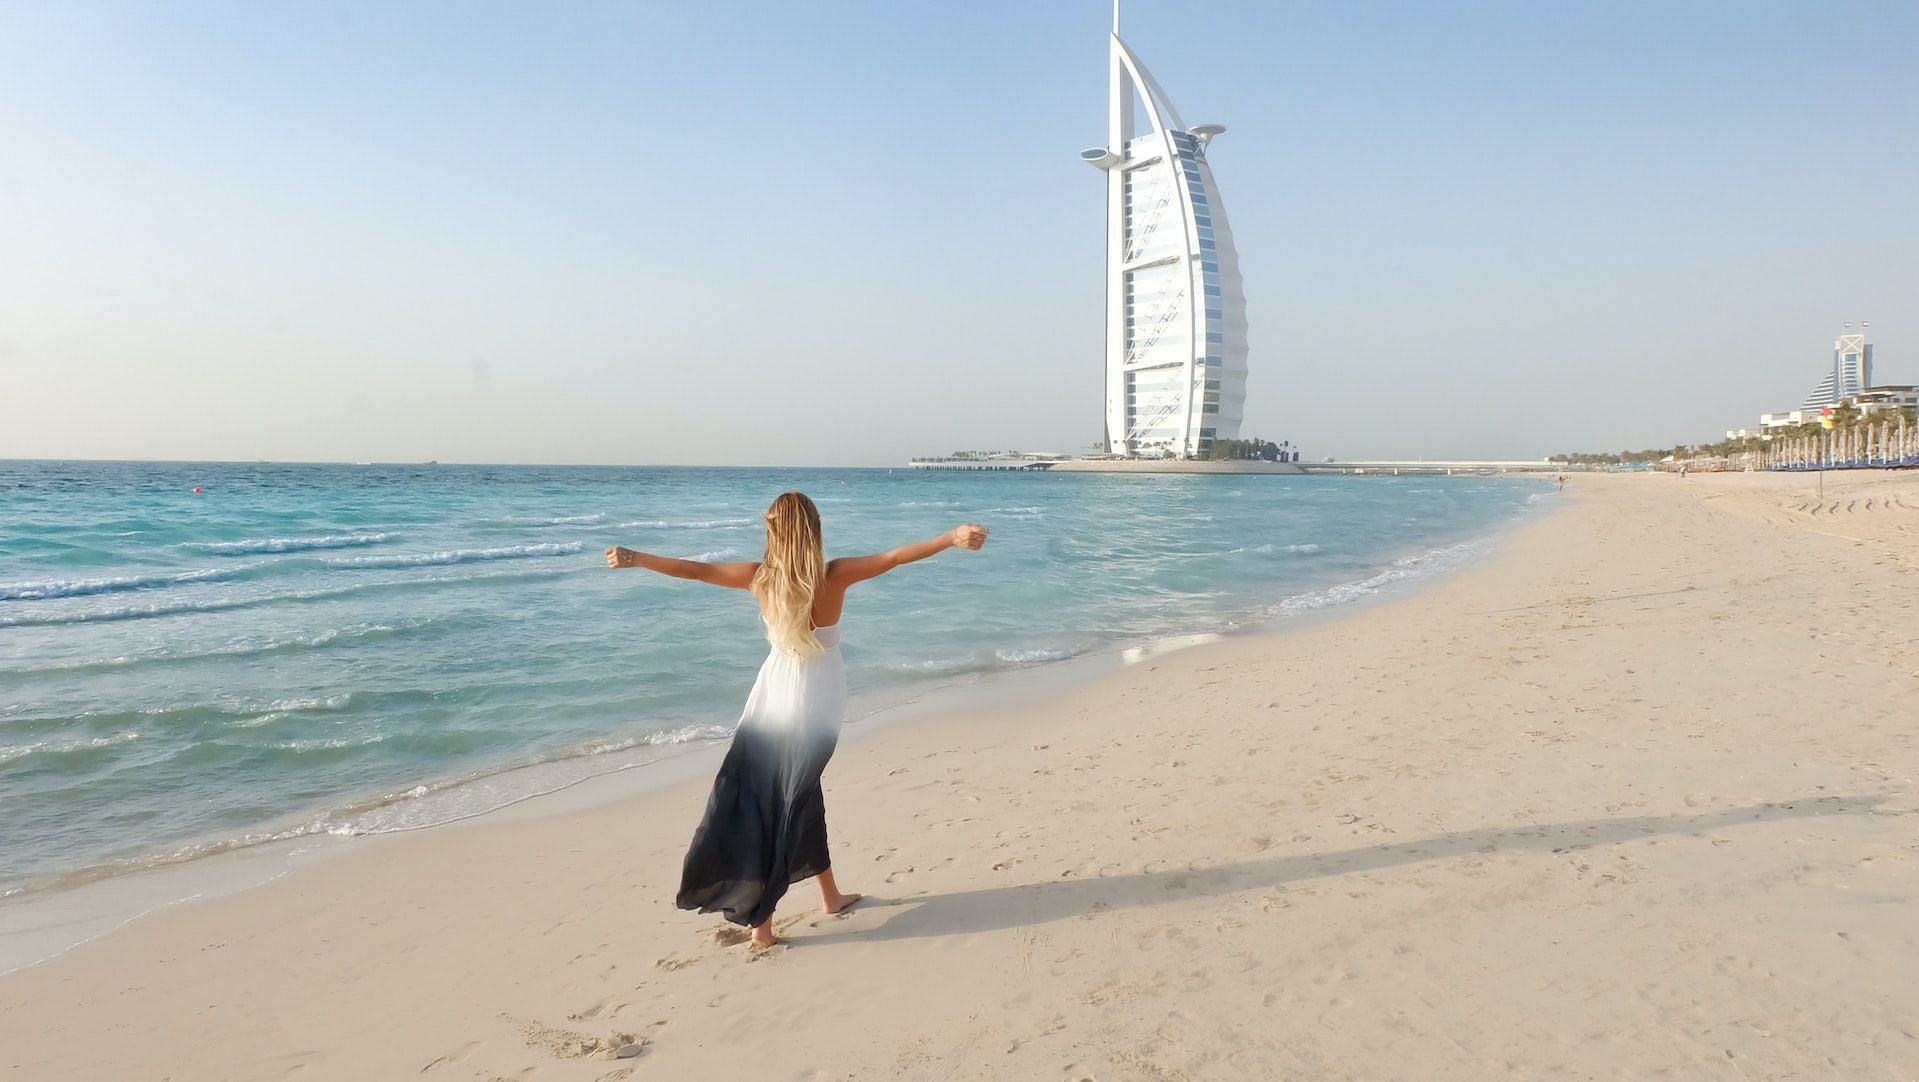 Dubai is the most loved place for fitness influencers. (Photo via Pexels/The Lazy Artist Gallery)